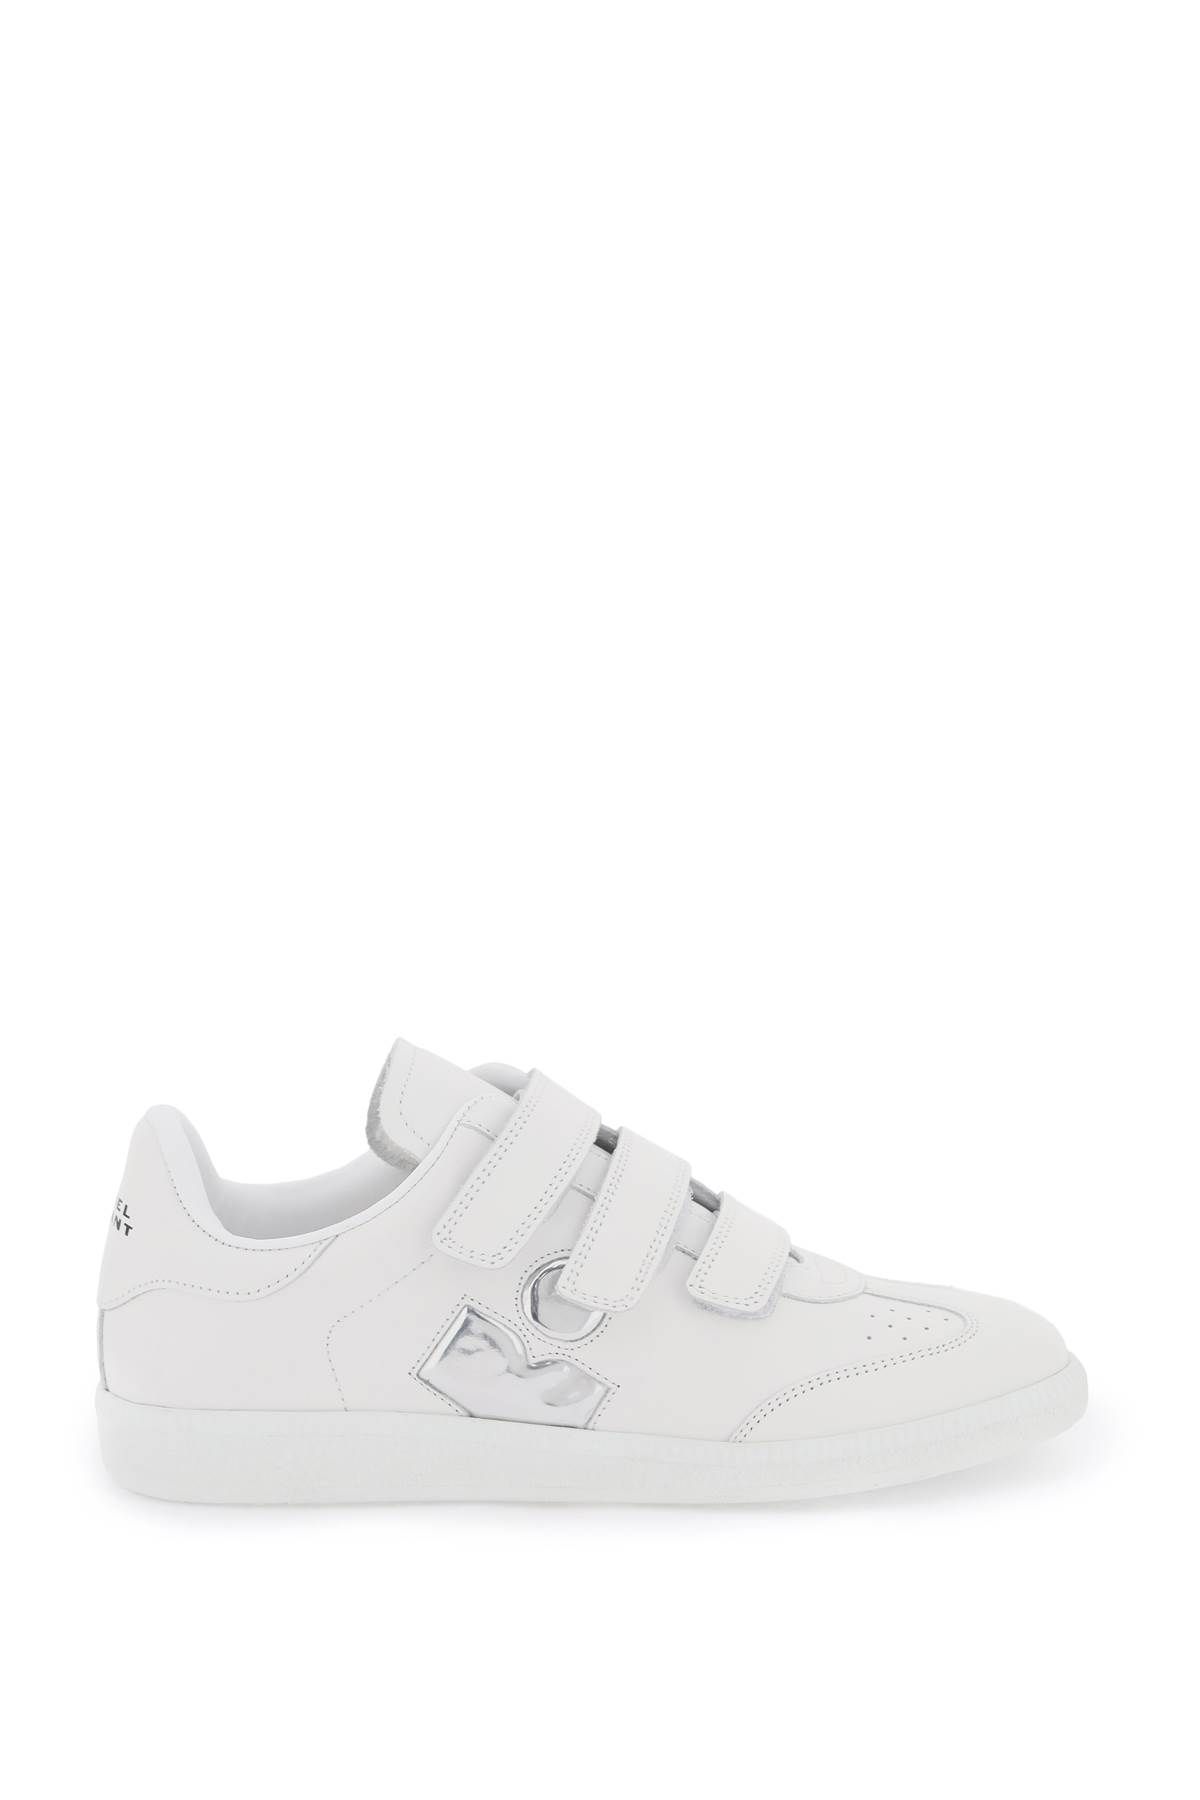 Marant Etoile Beth Leather Sneakers In White